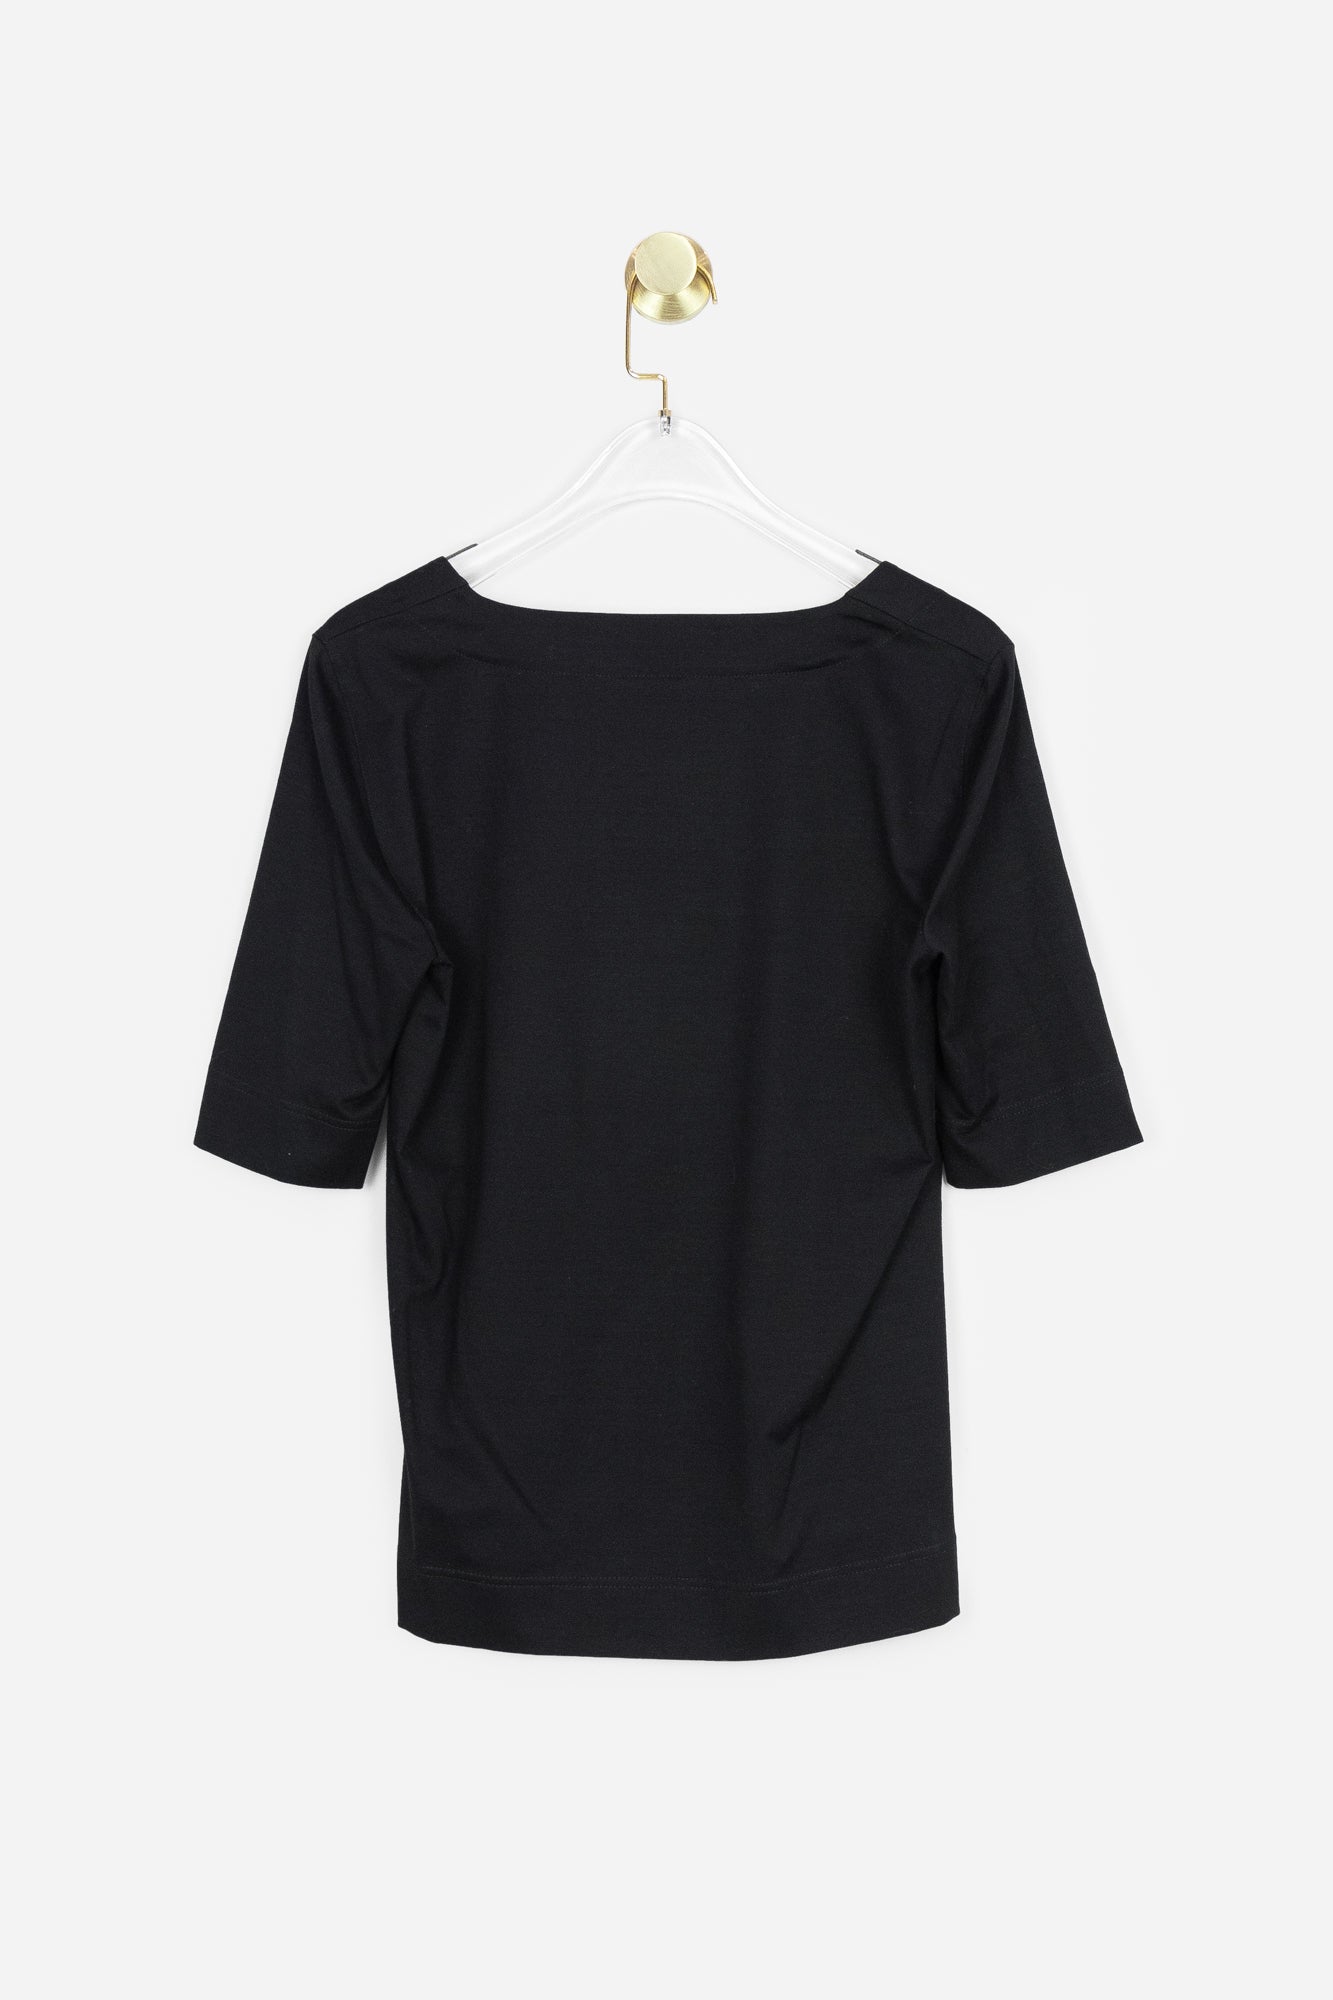 Black Squared Neck T-Shirt - So Over It Luxury Consignment